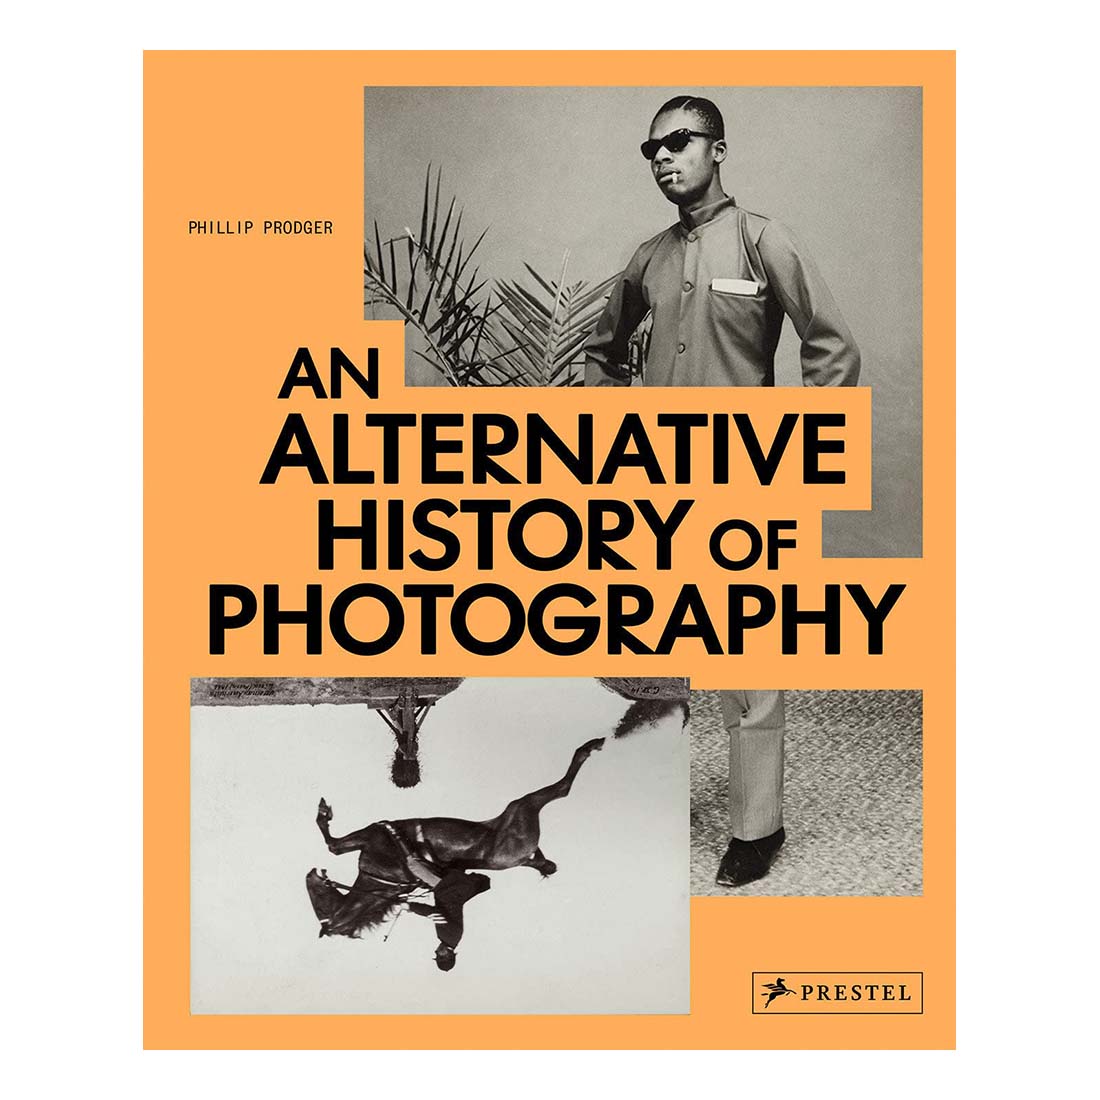 An Alternate History of Photography